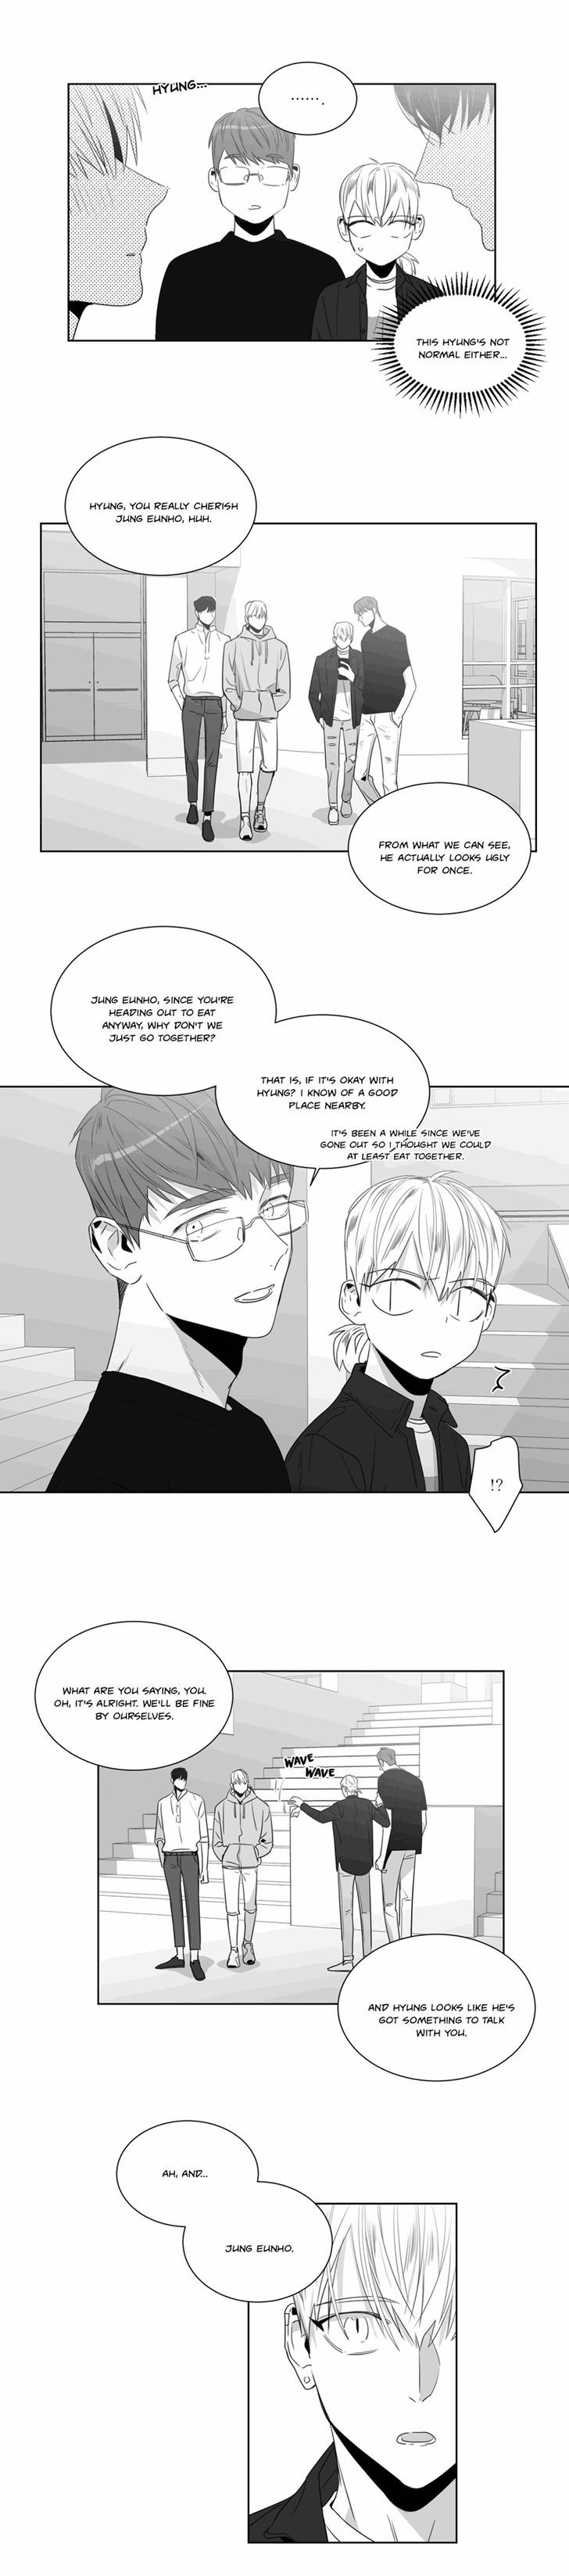 Lover Boy (Lezhin) Chapter 038 page 6